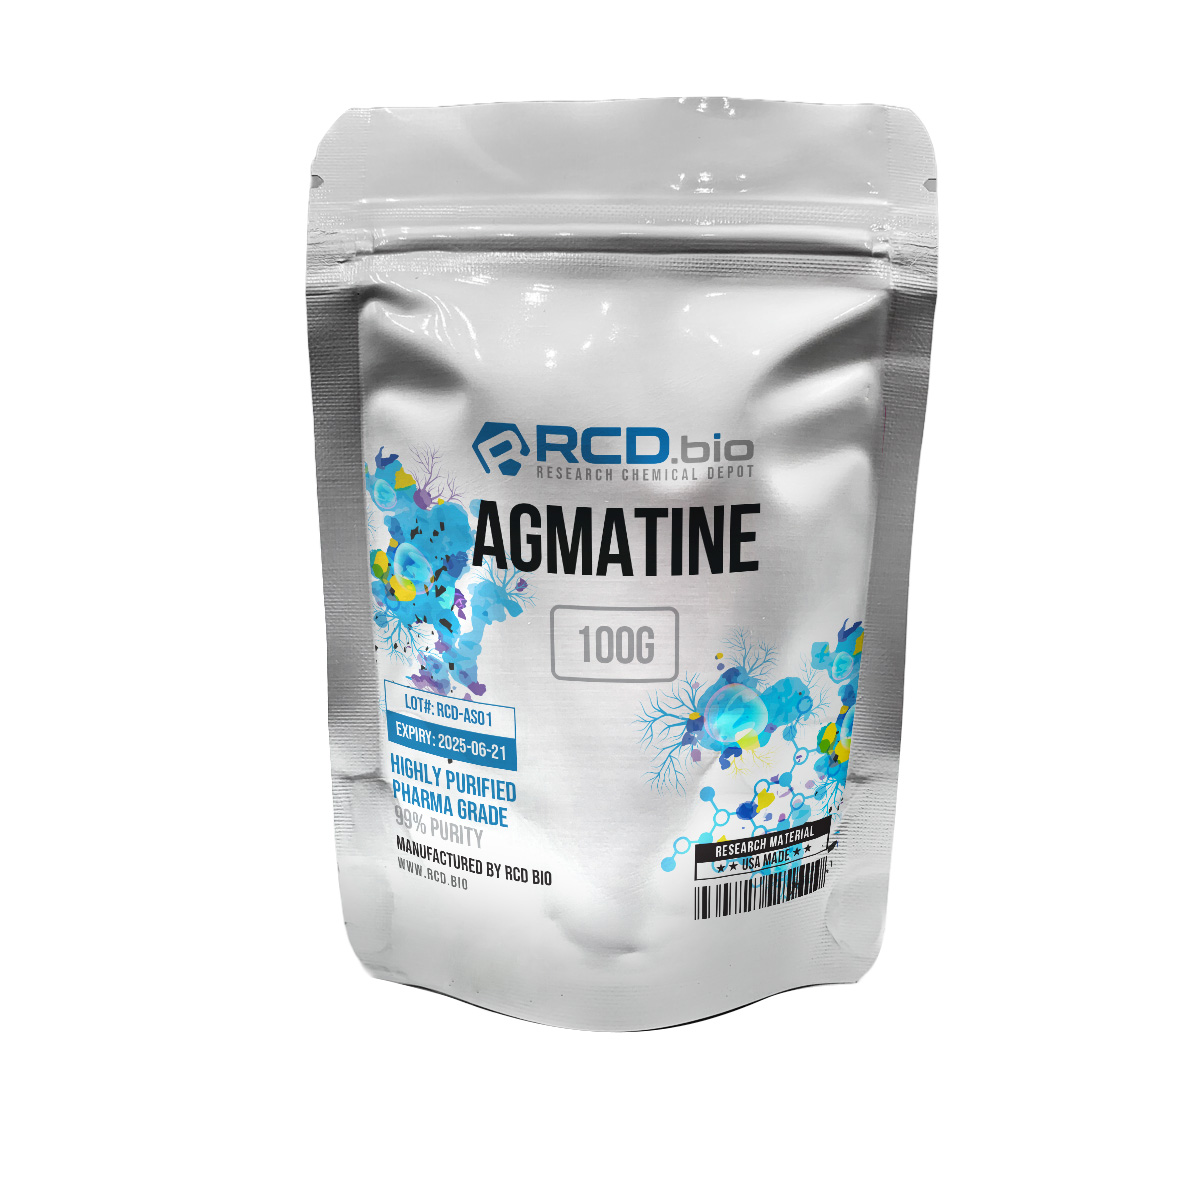 Agmatine-100g-70x70_NU